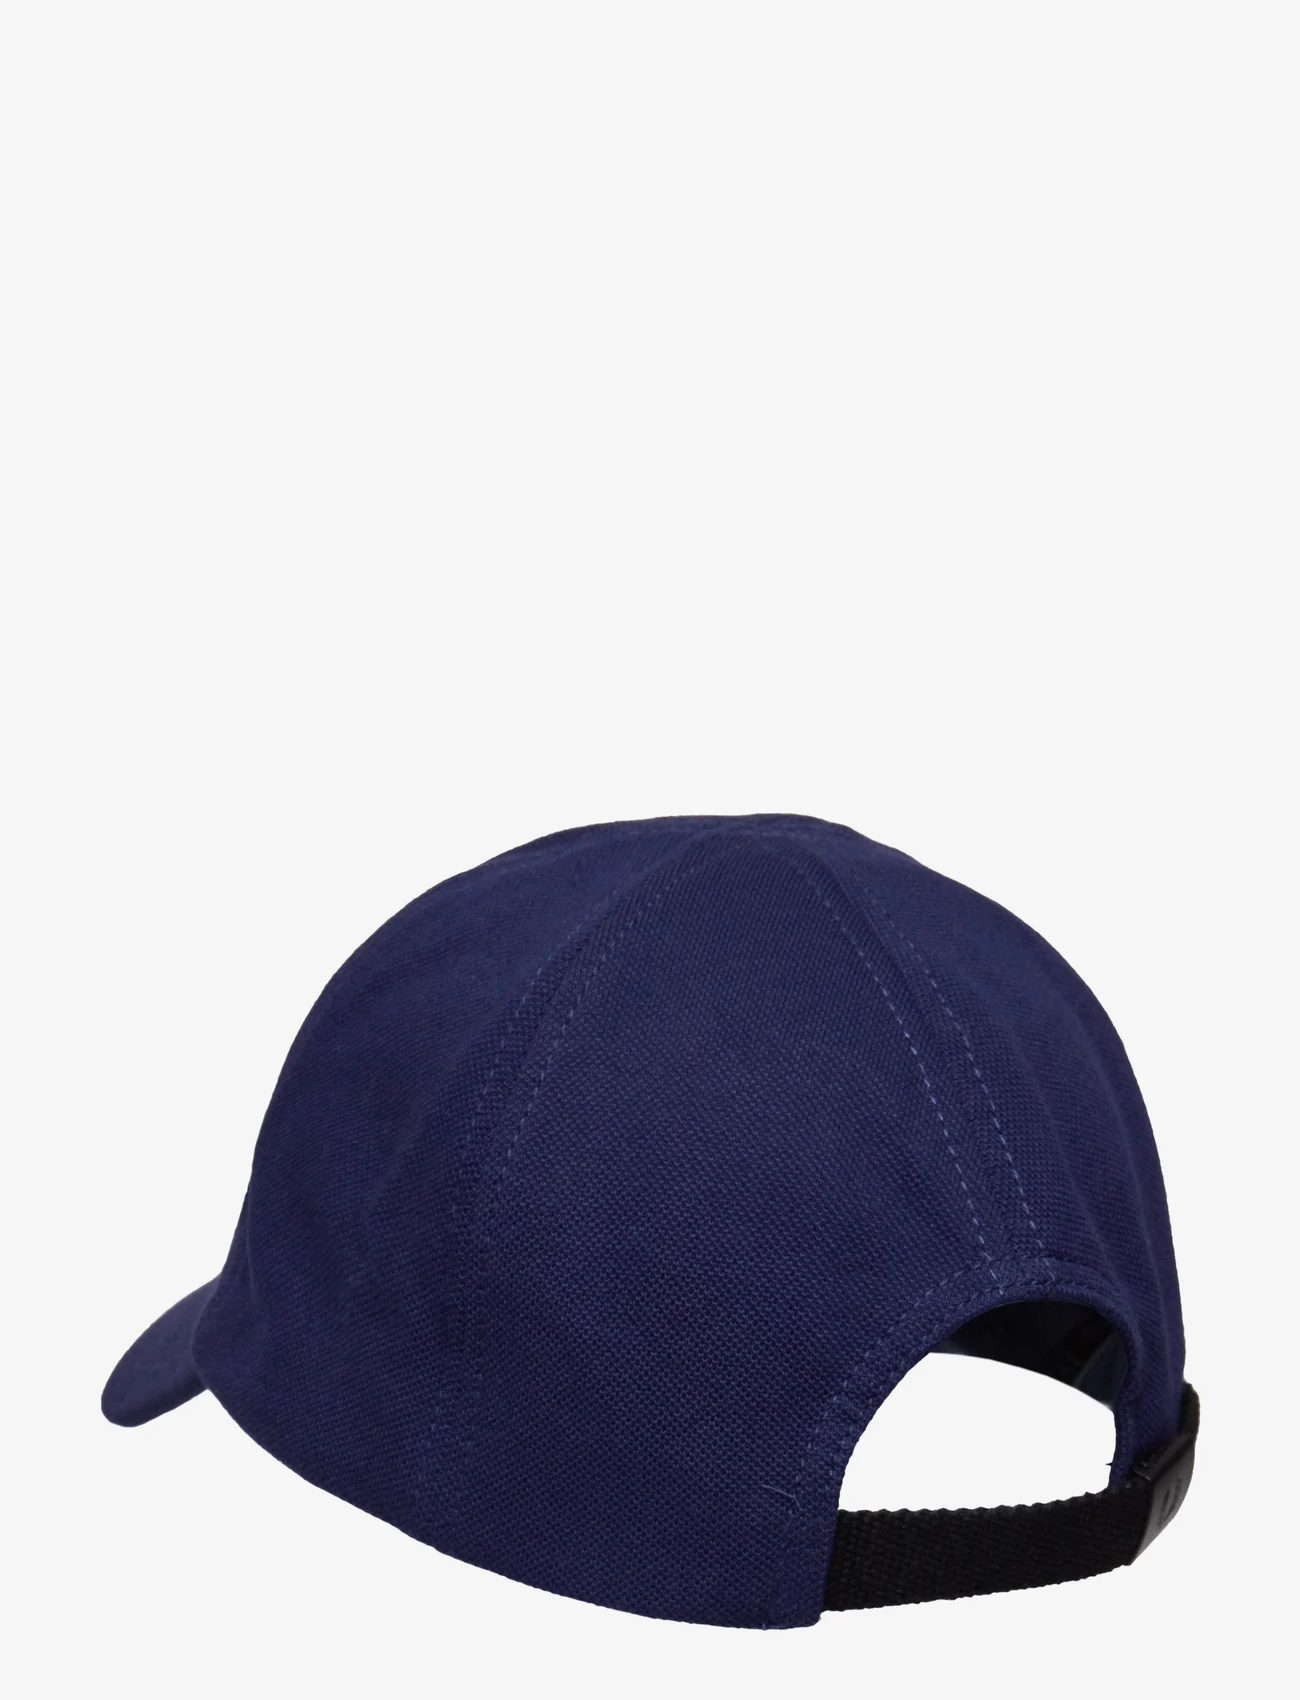 Fred Perry - PIQUE CLASSIC CAP - kepsar - french navy - 1